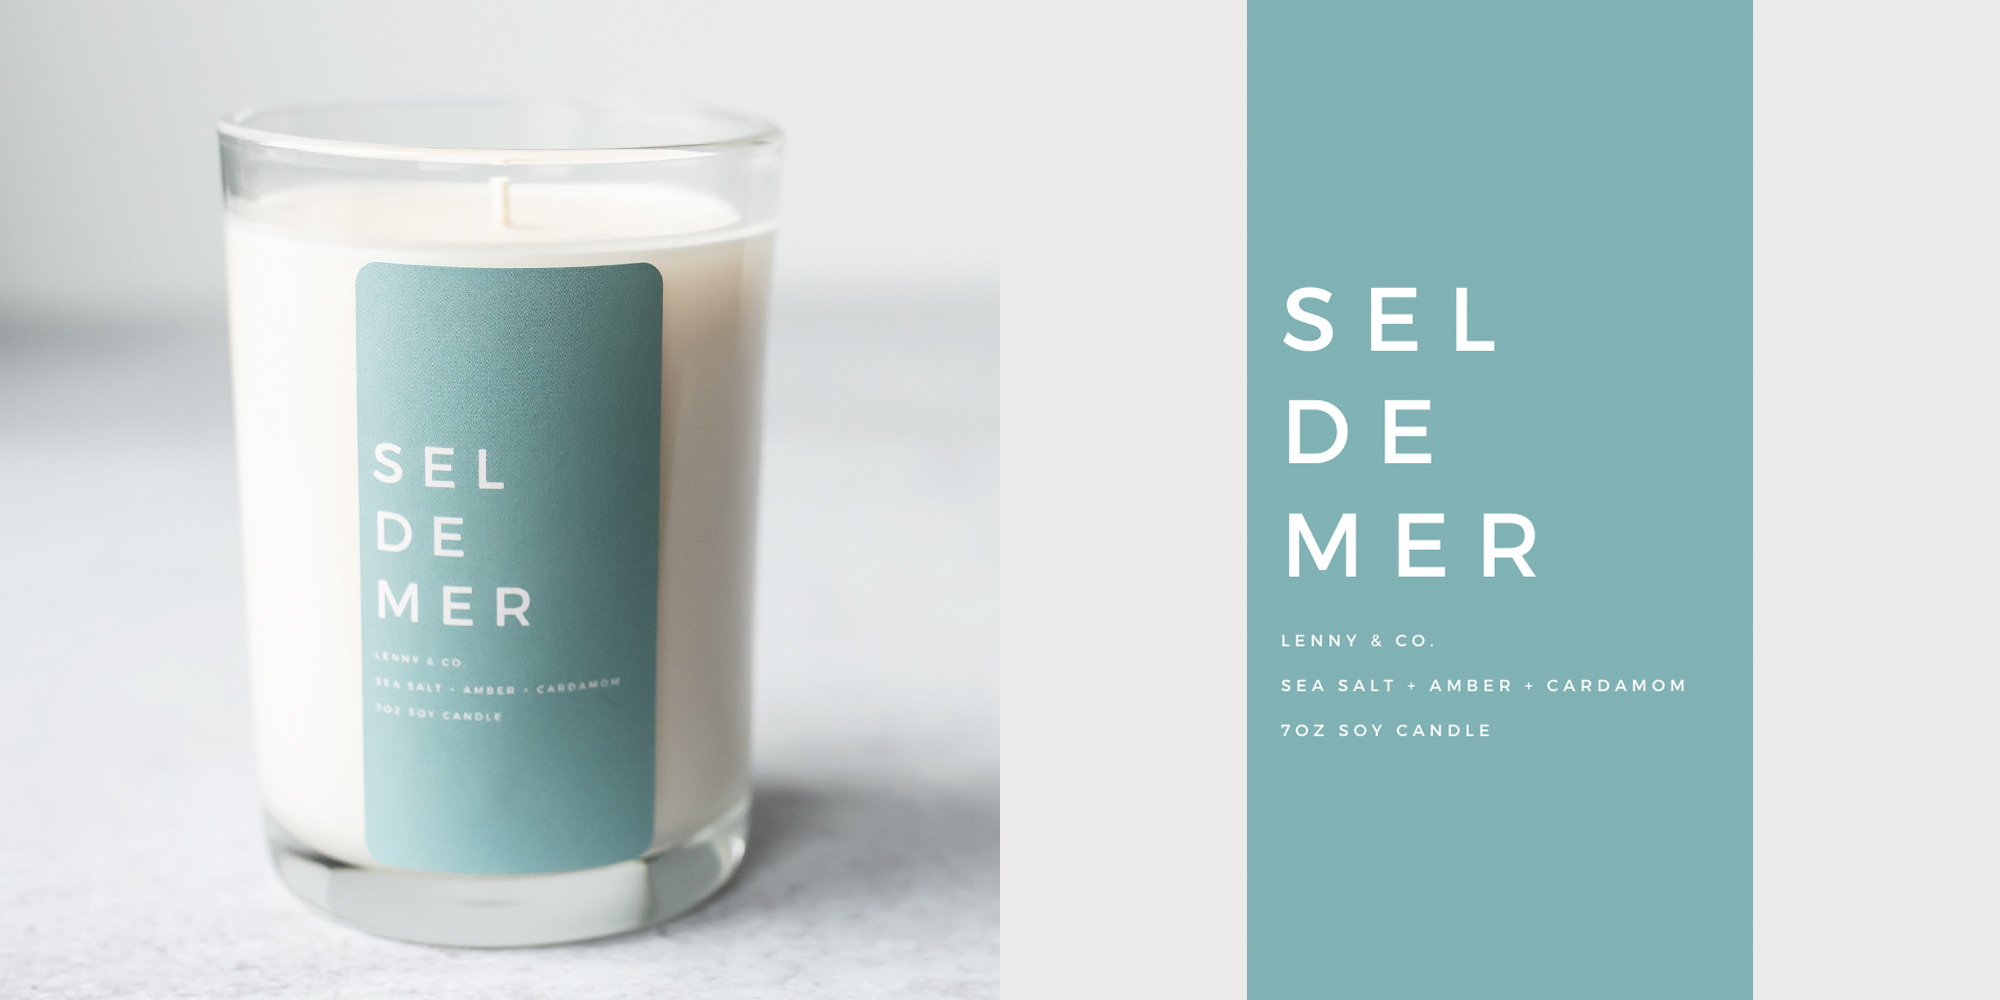 Sel de Mer fragrance oil candle and label.